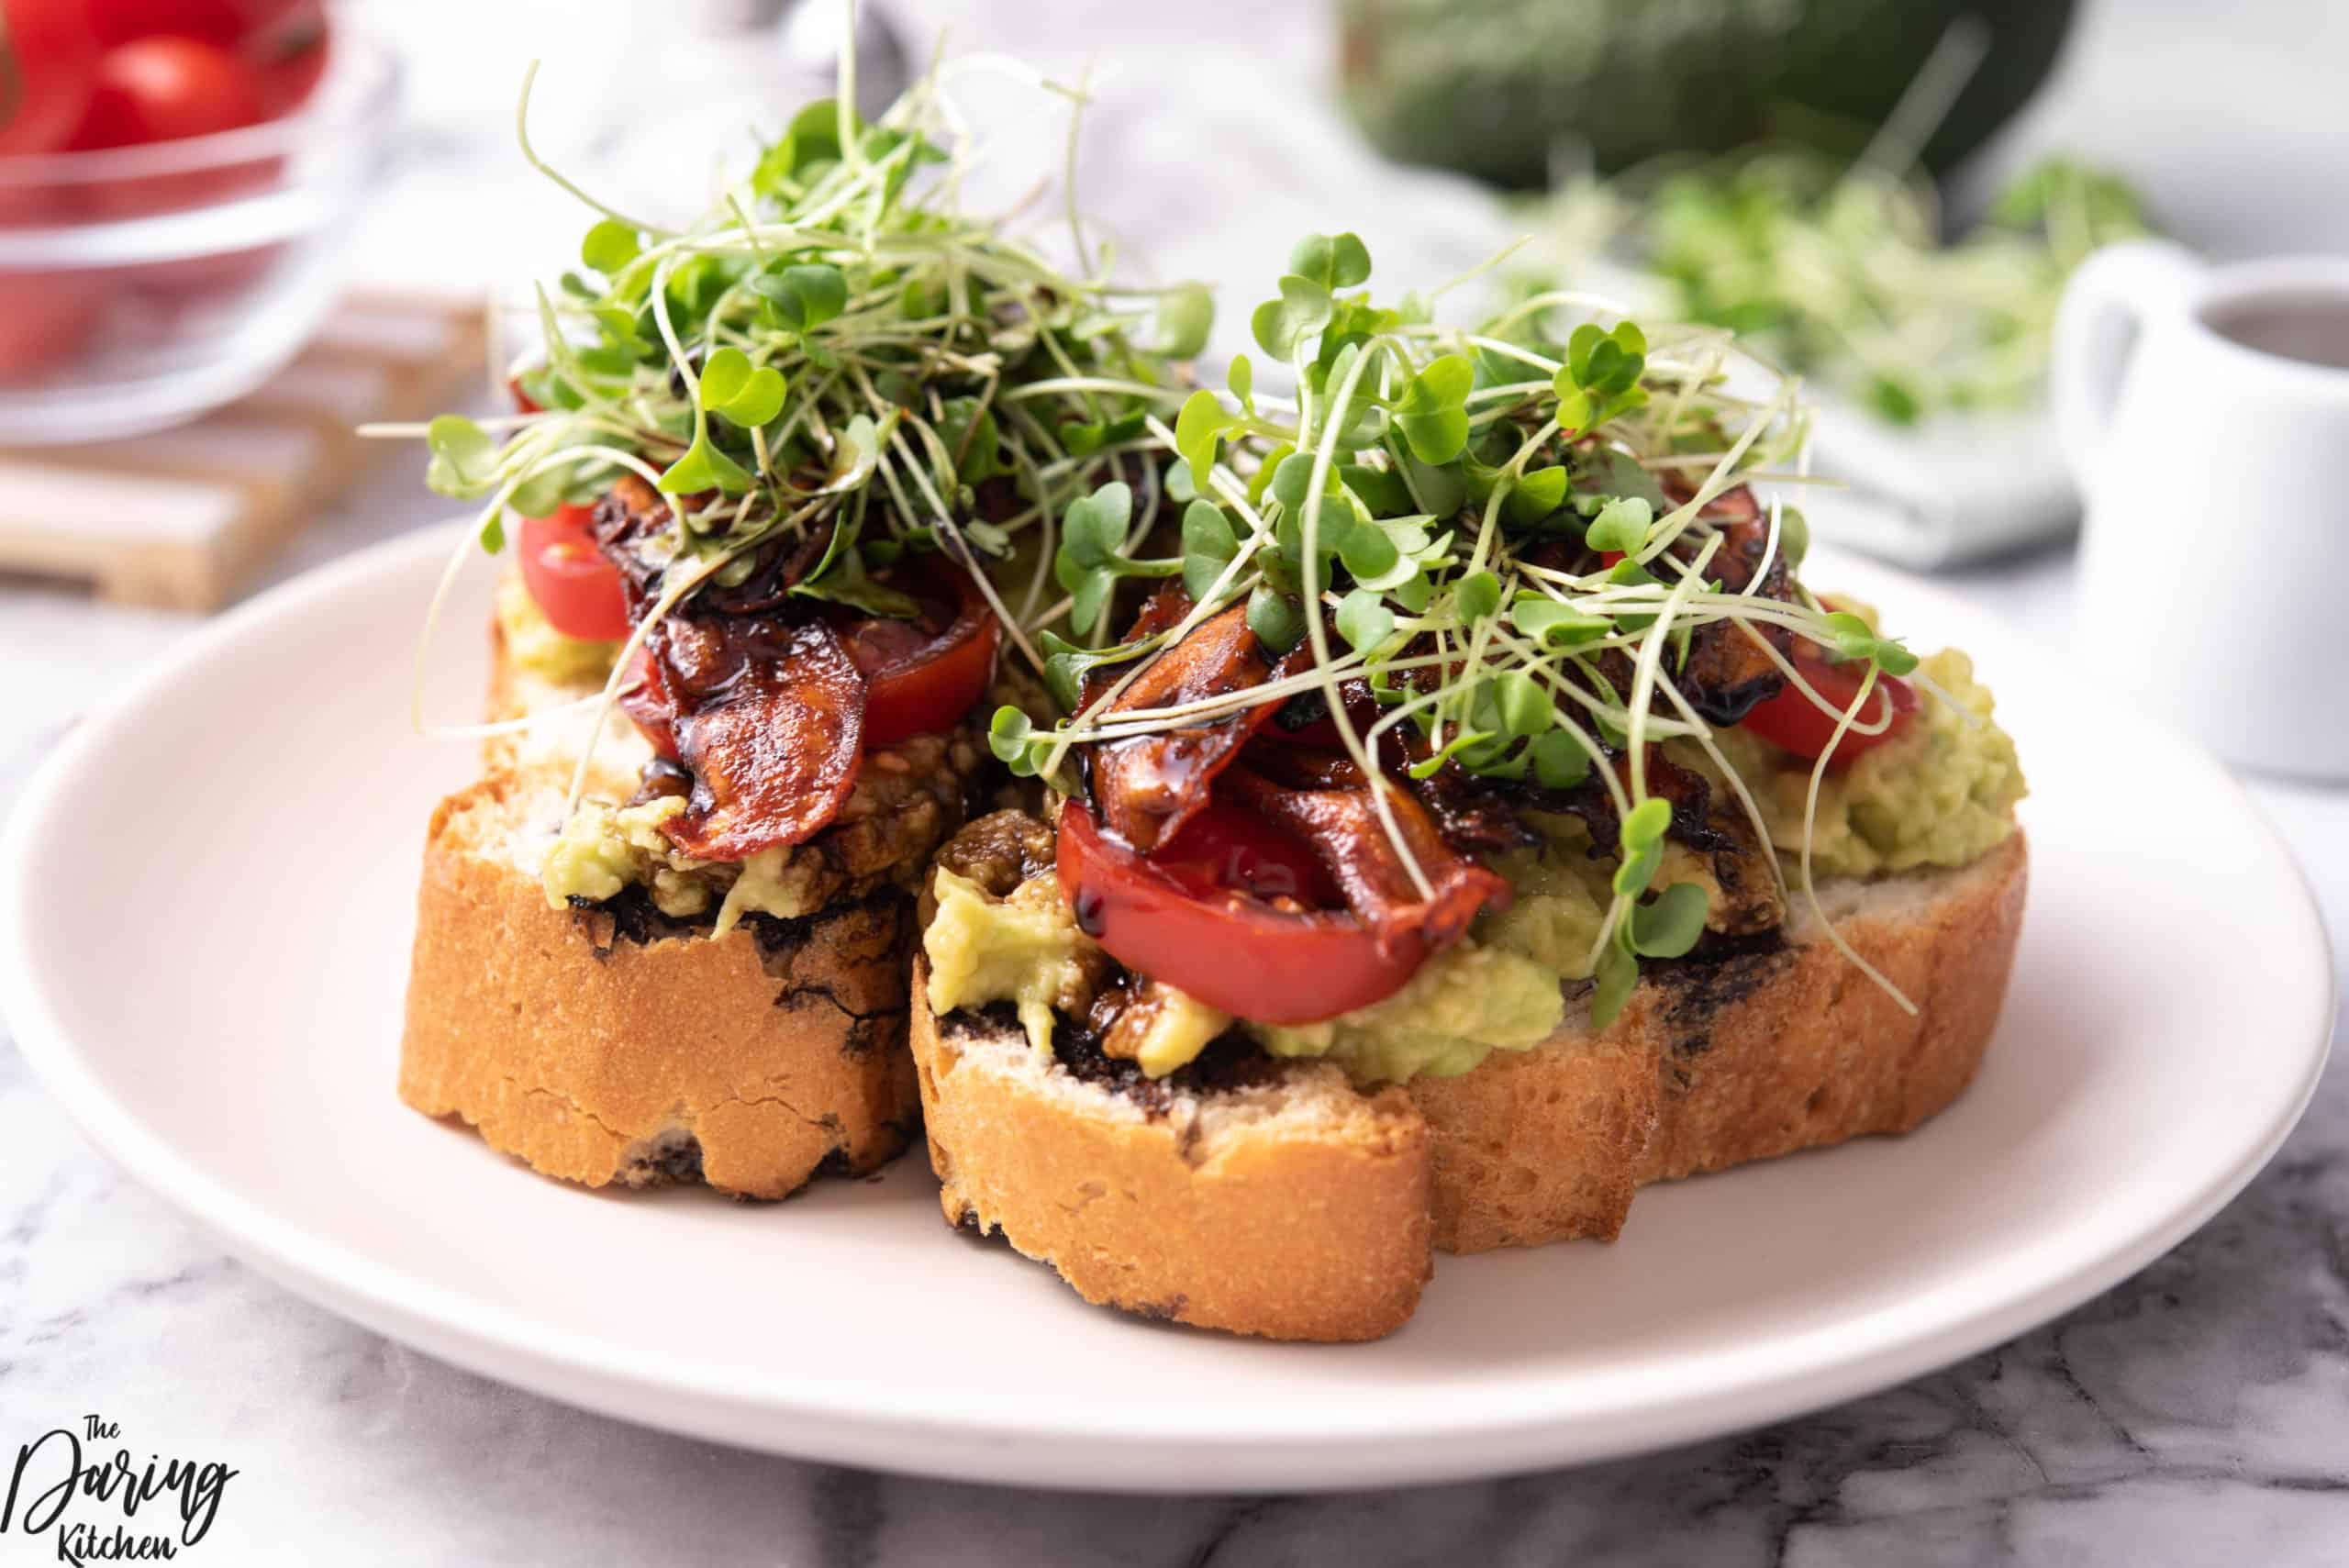 Avocado Toast with Carrot Bacon and Microgreens | by The Daring Kitchen